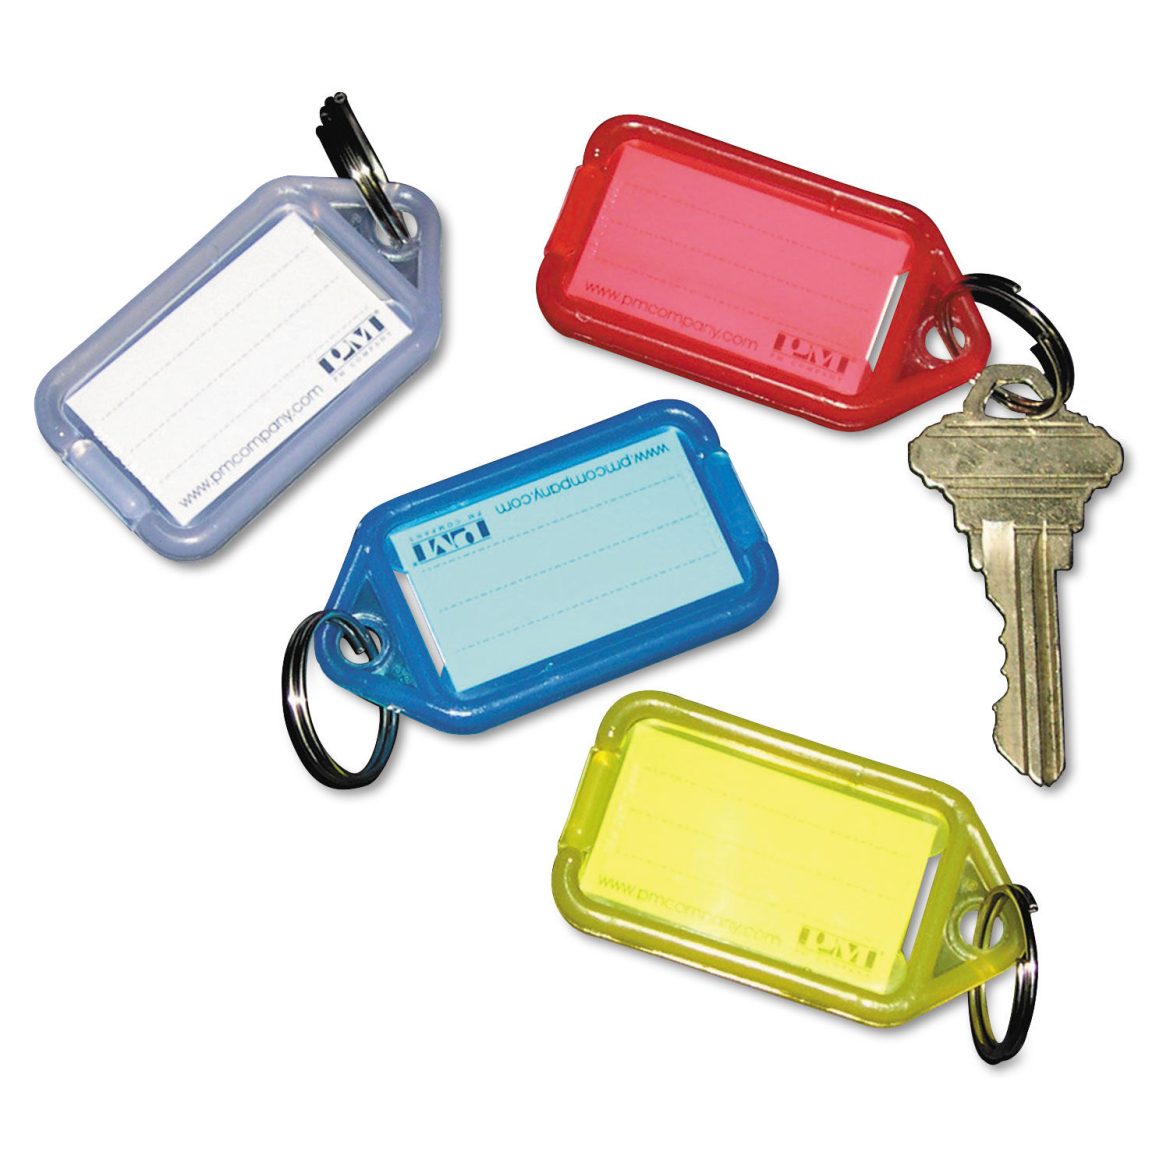 Key Tags – An Inexpensive Way to Promote Your Business